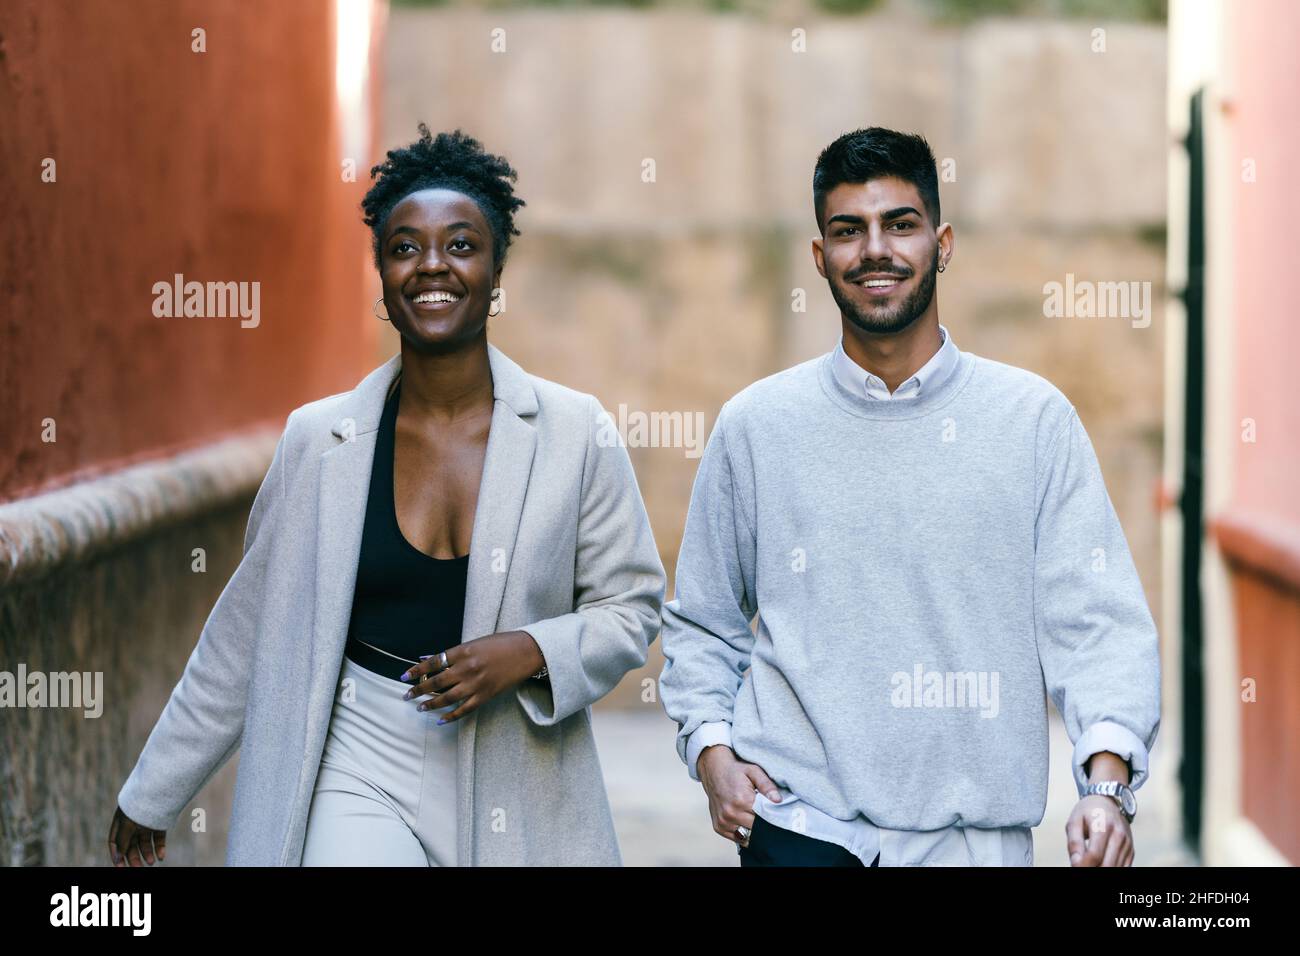 Two smiling models of different ethnicities walking through a narrow street Stock Photo